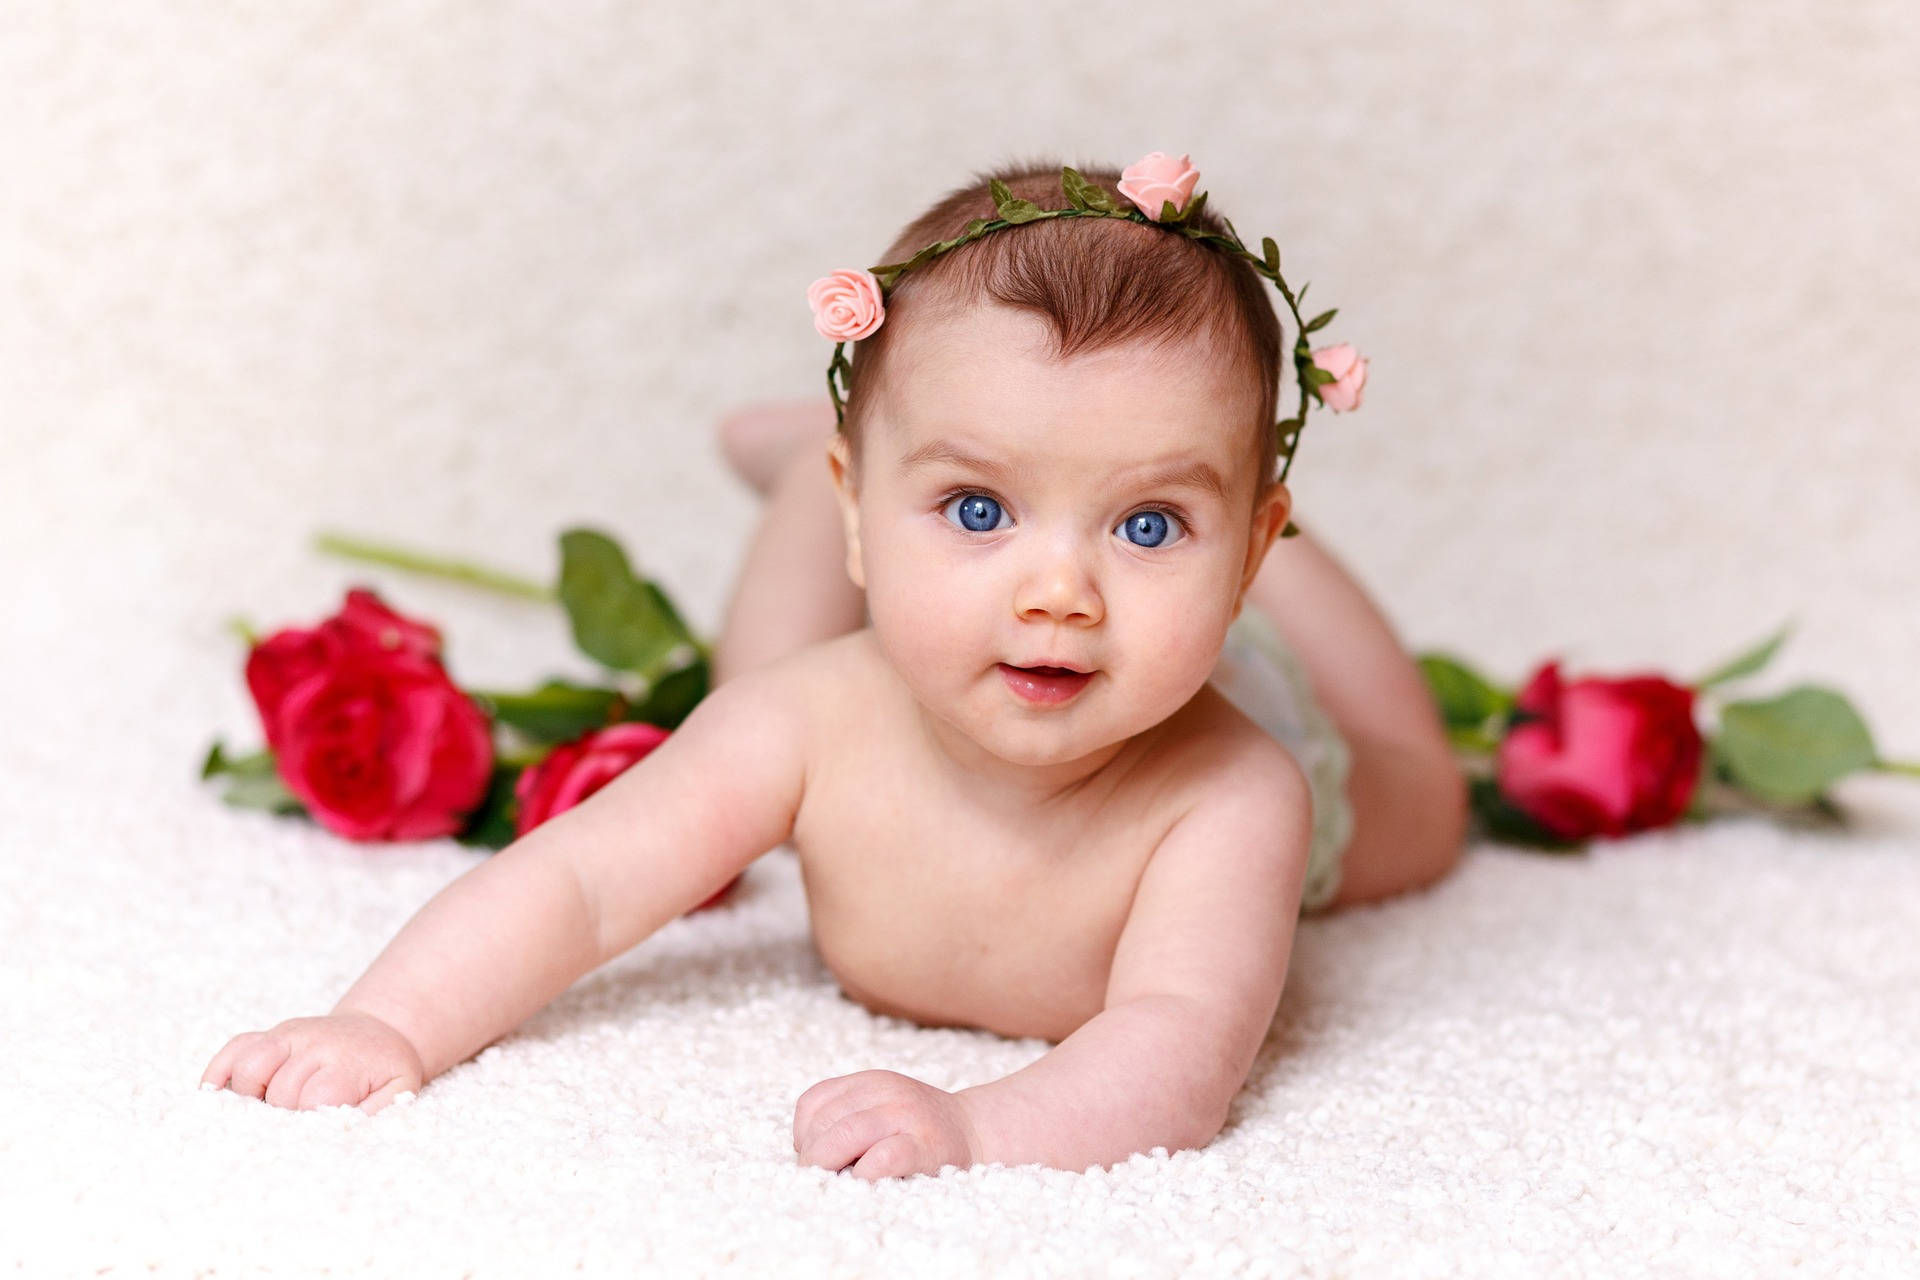 Very Cute Baby With Red Roses Wallpaper